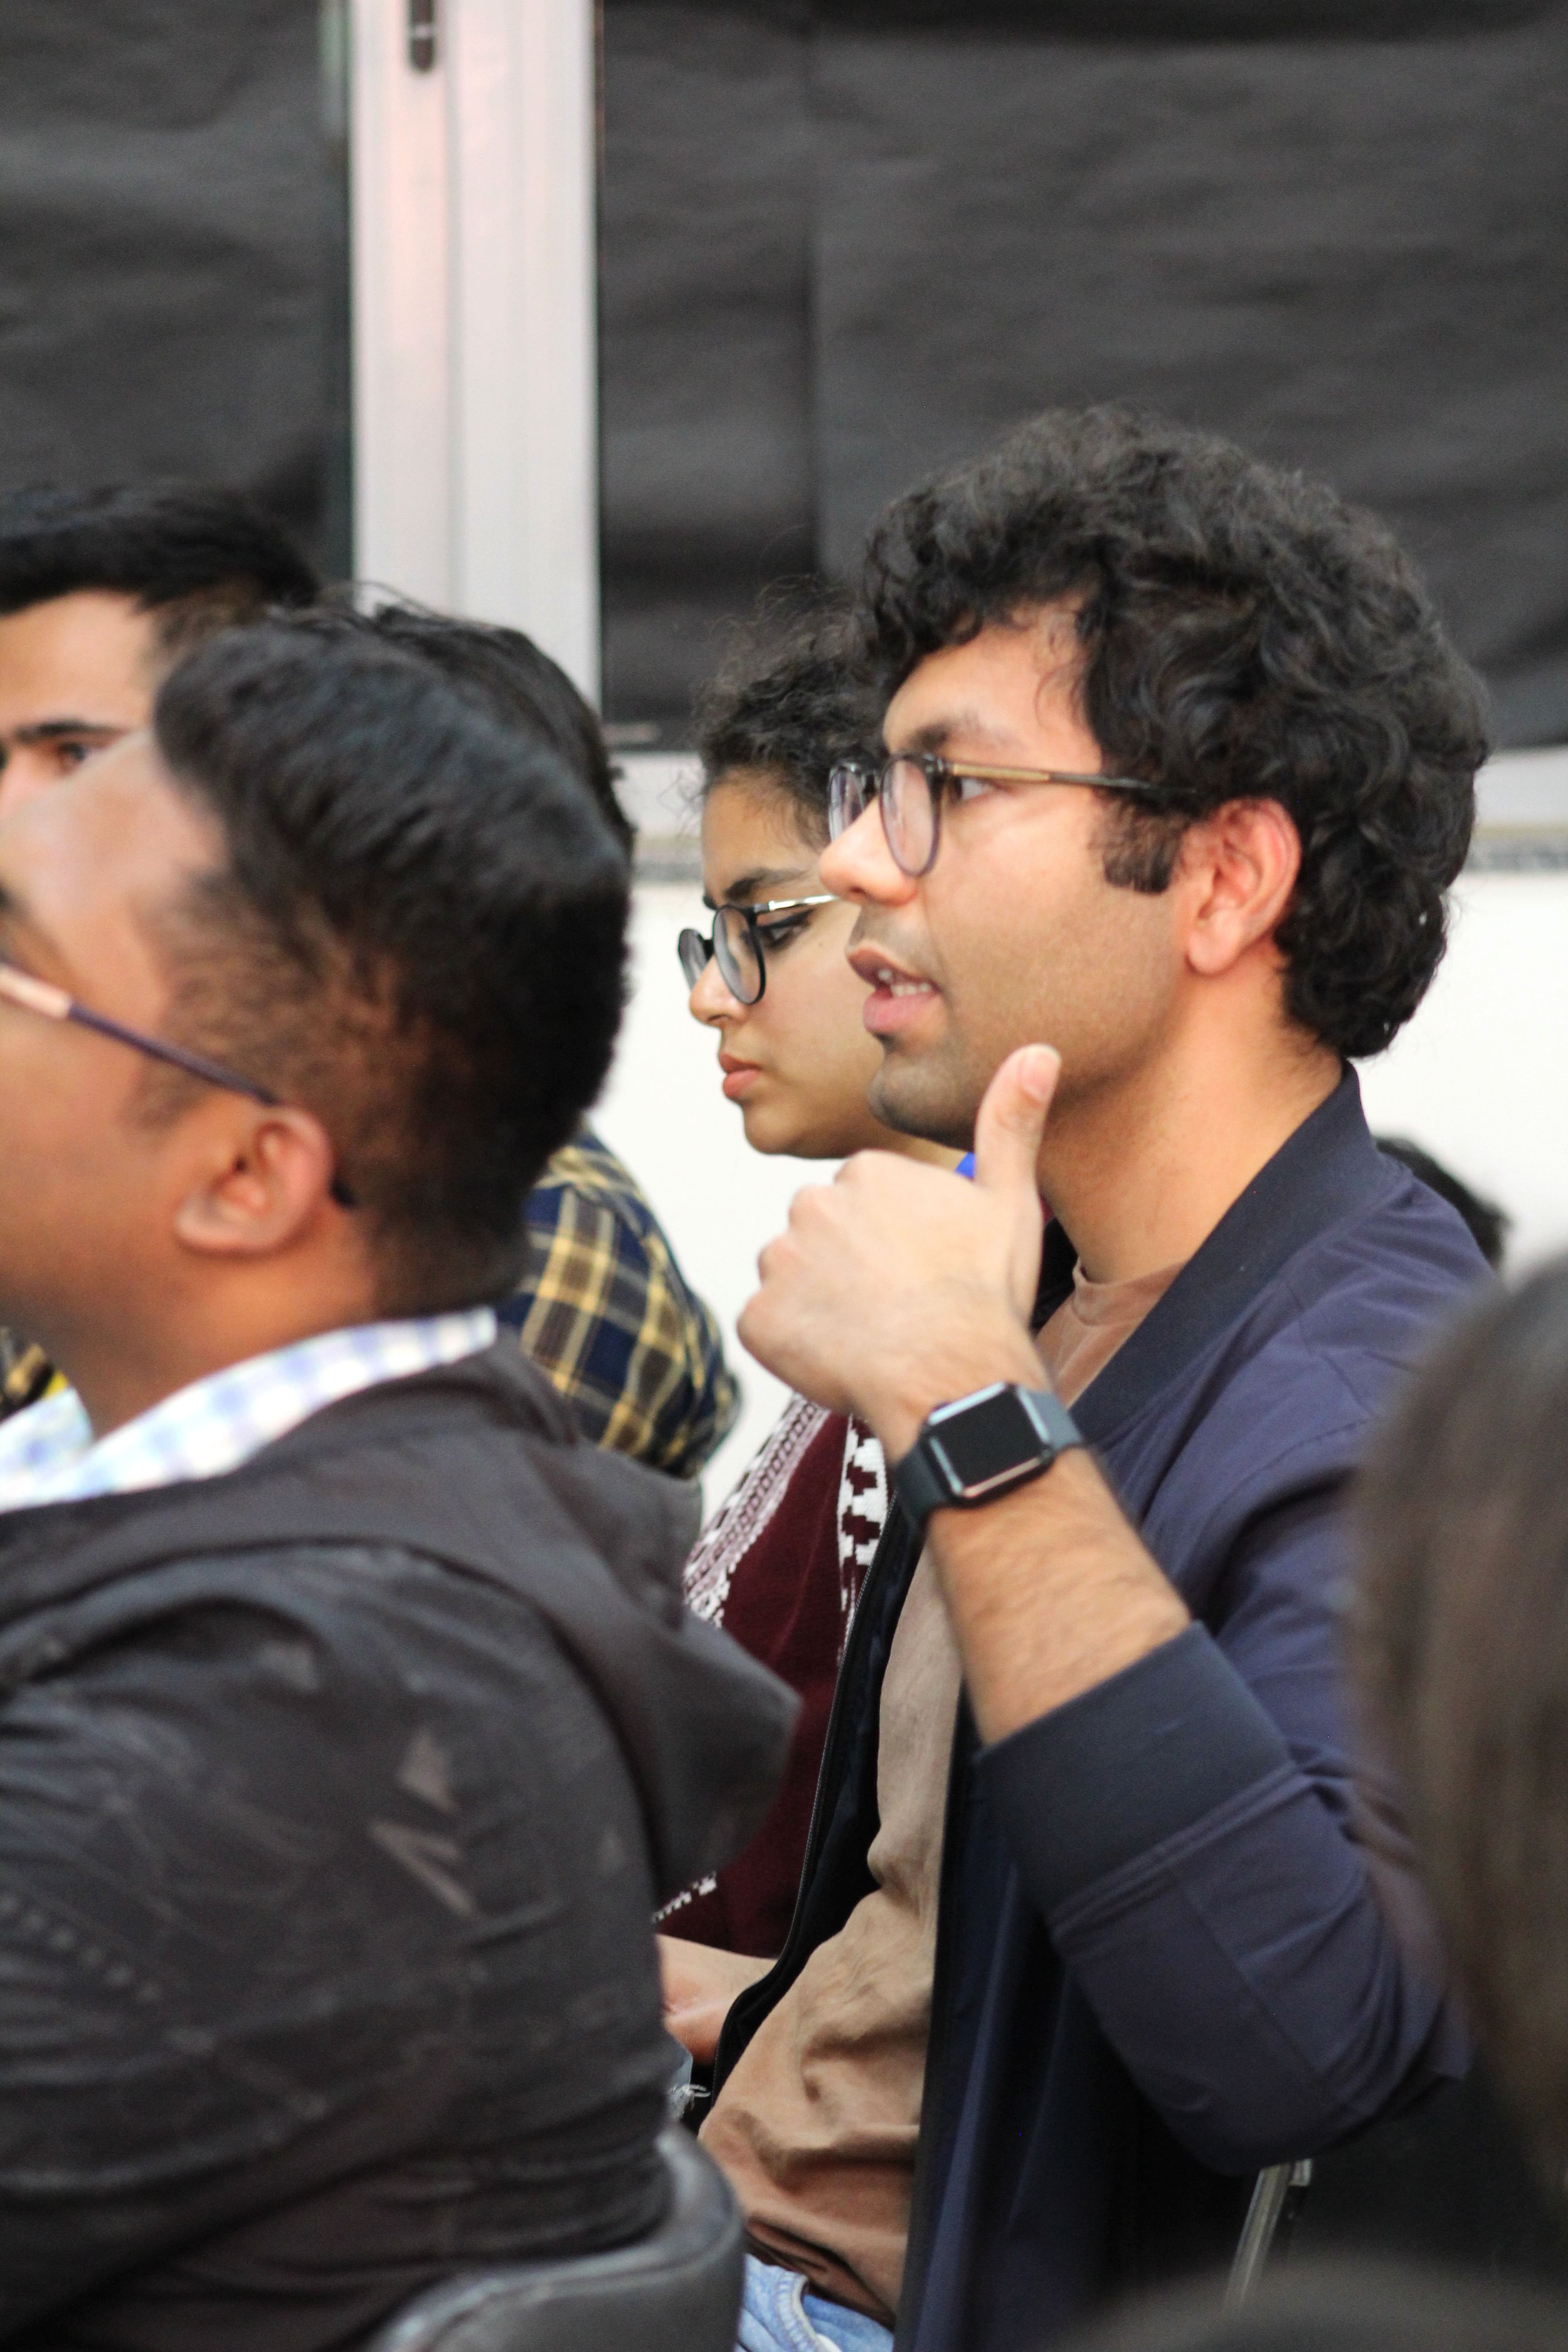 Students at South Asian University ask questions in Nihal Perera's talk.